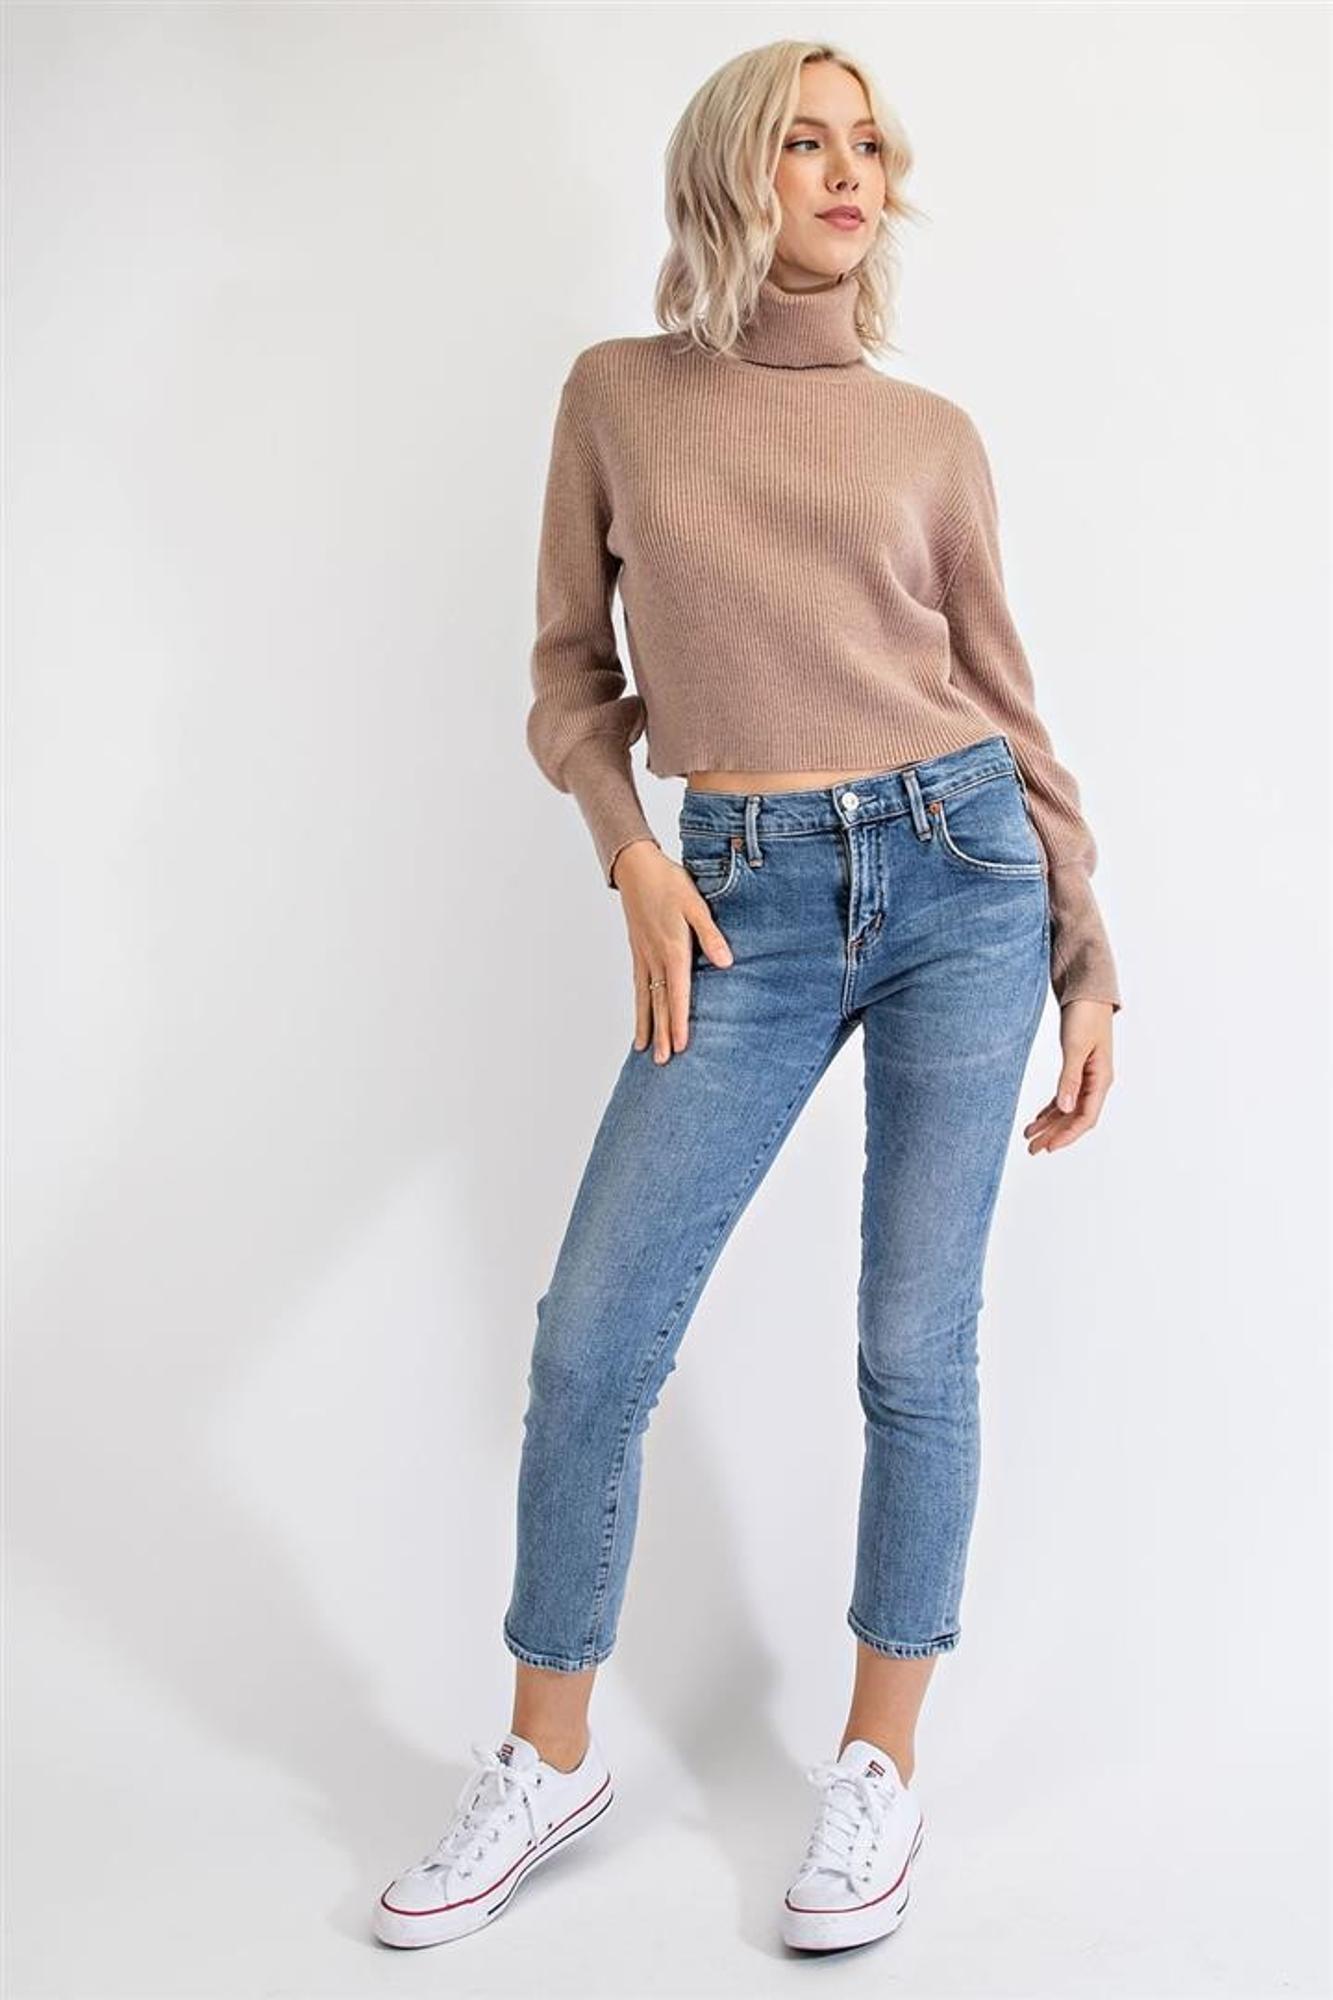 Afternoon Stroll Turtleneck Cropped Sweater